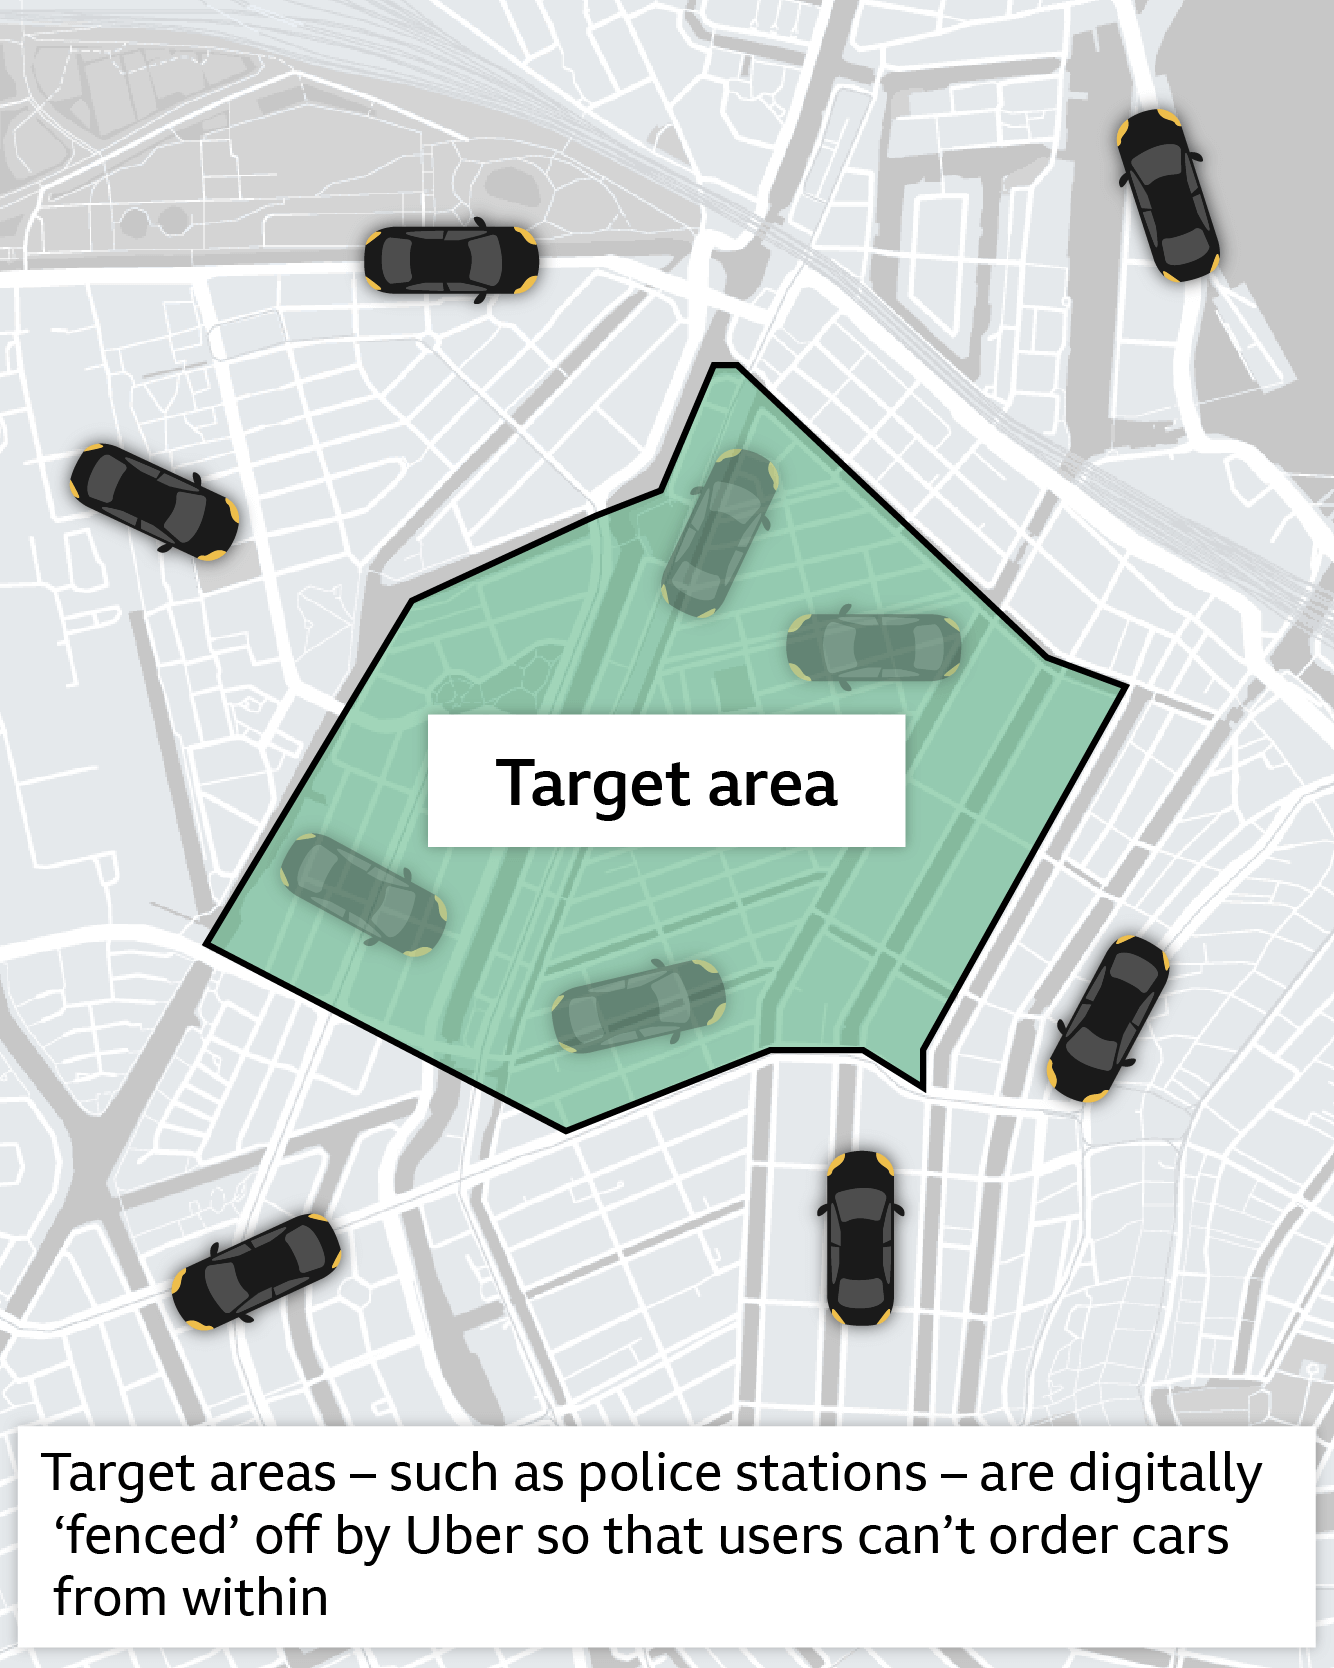 A map showing how Uber's geofencing worked to set a target zone, not allowing people to order a ride within that specific location 